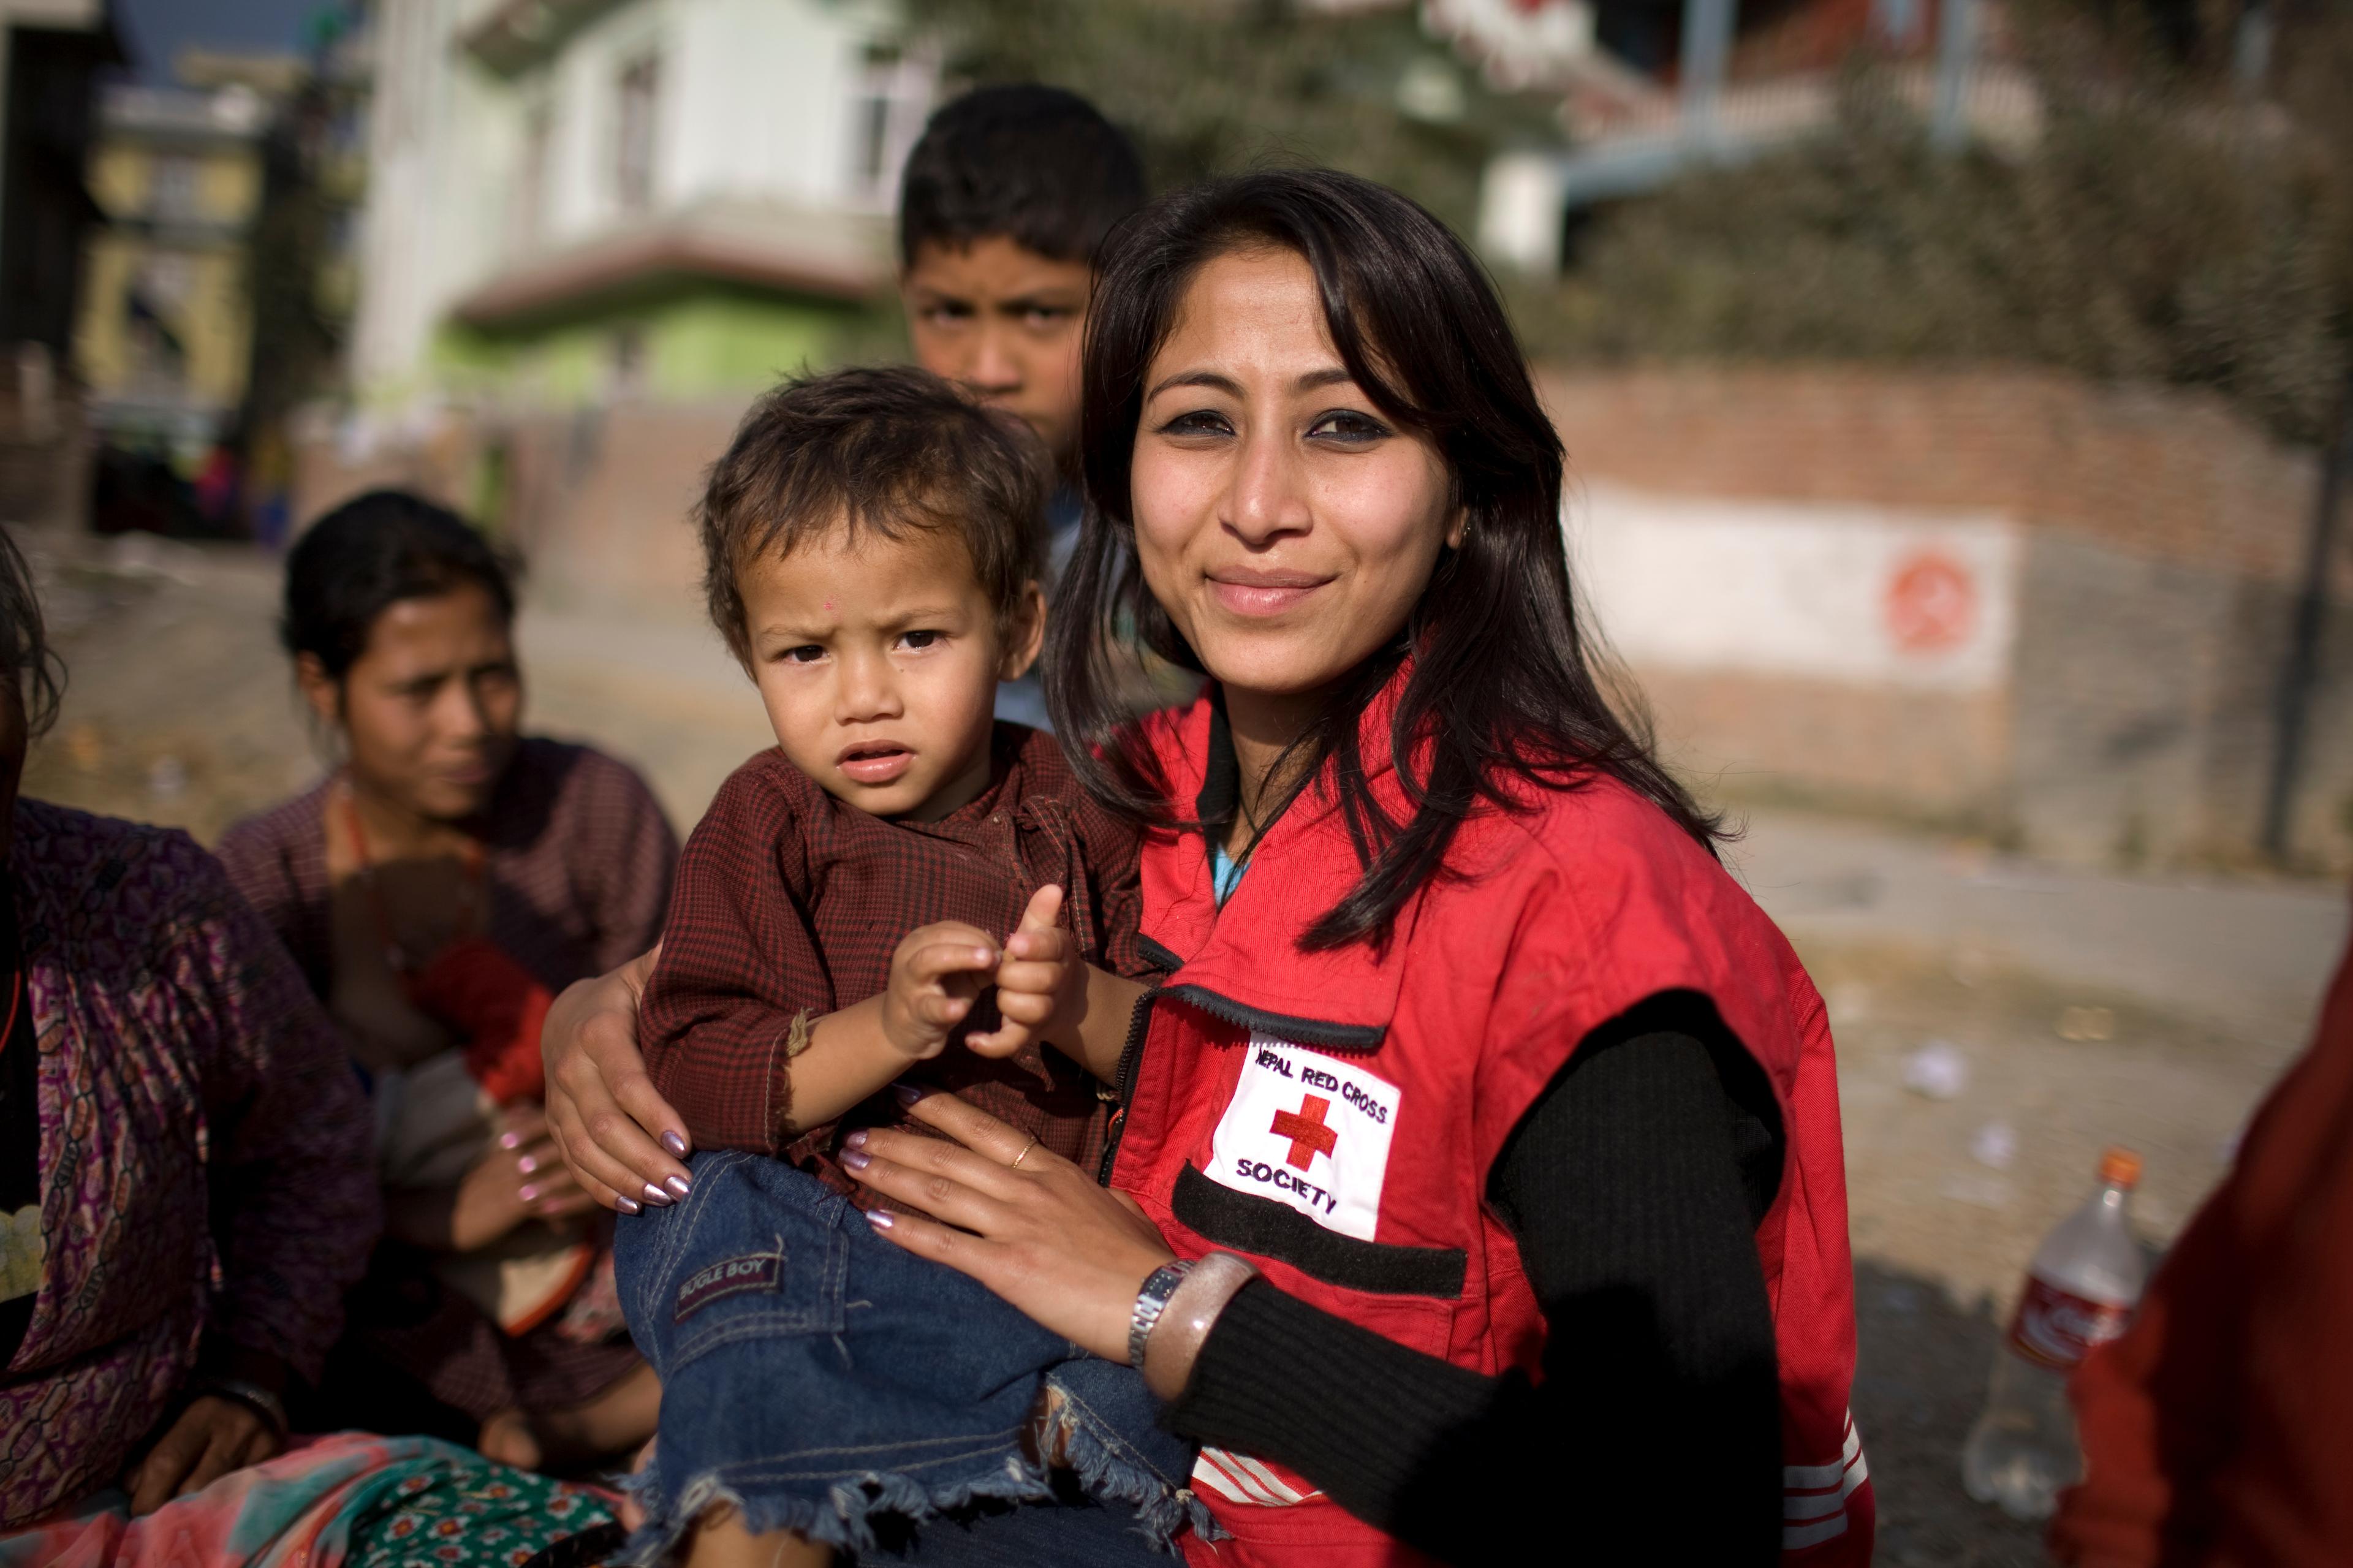 Nepal Red Cross Action Team volunteer Nina Khadgi (22) holds Nisha Rai (2) while waiting for her parents to come to motivate them to have Nisha vaccinated against measles.